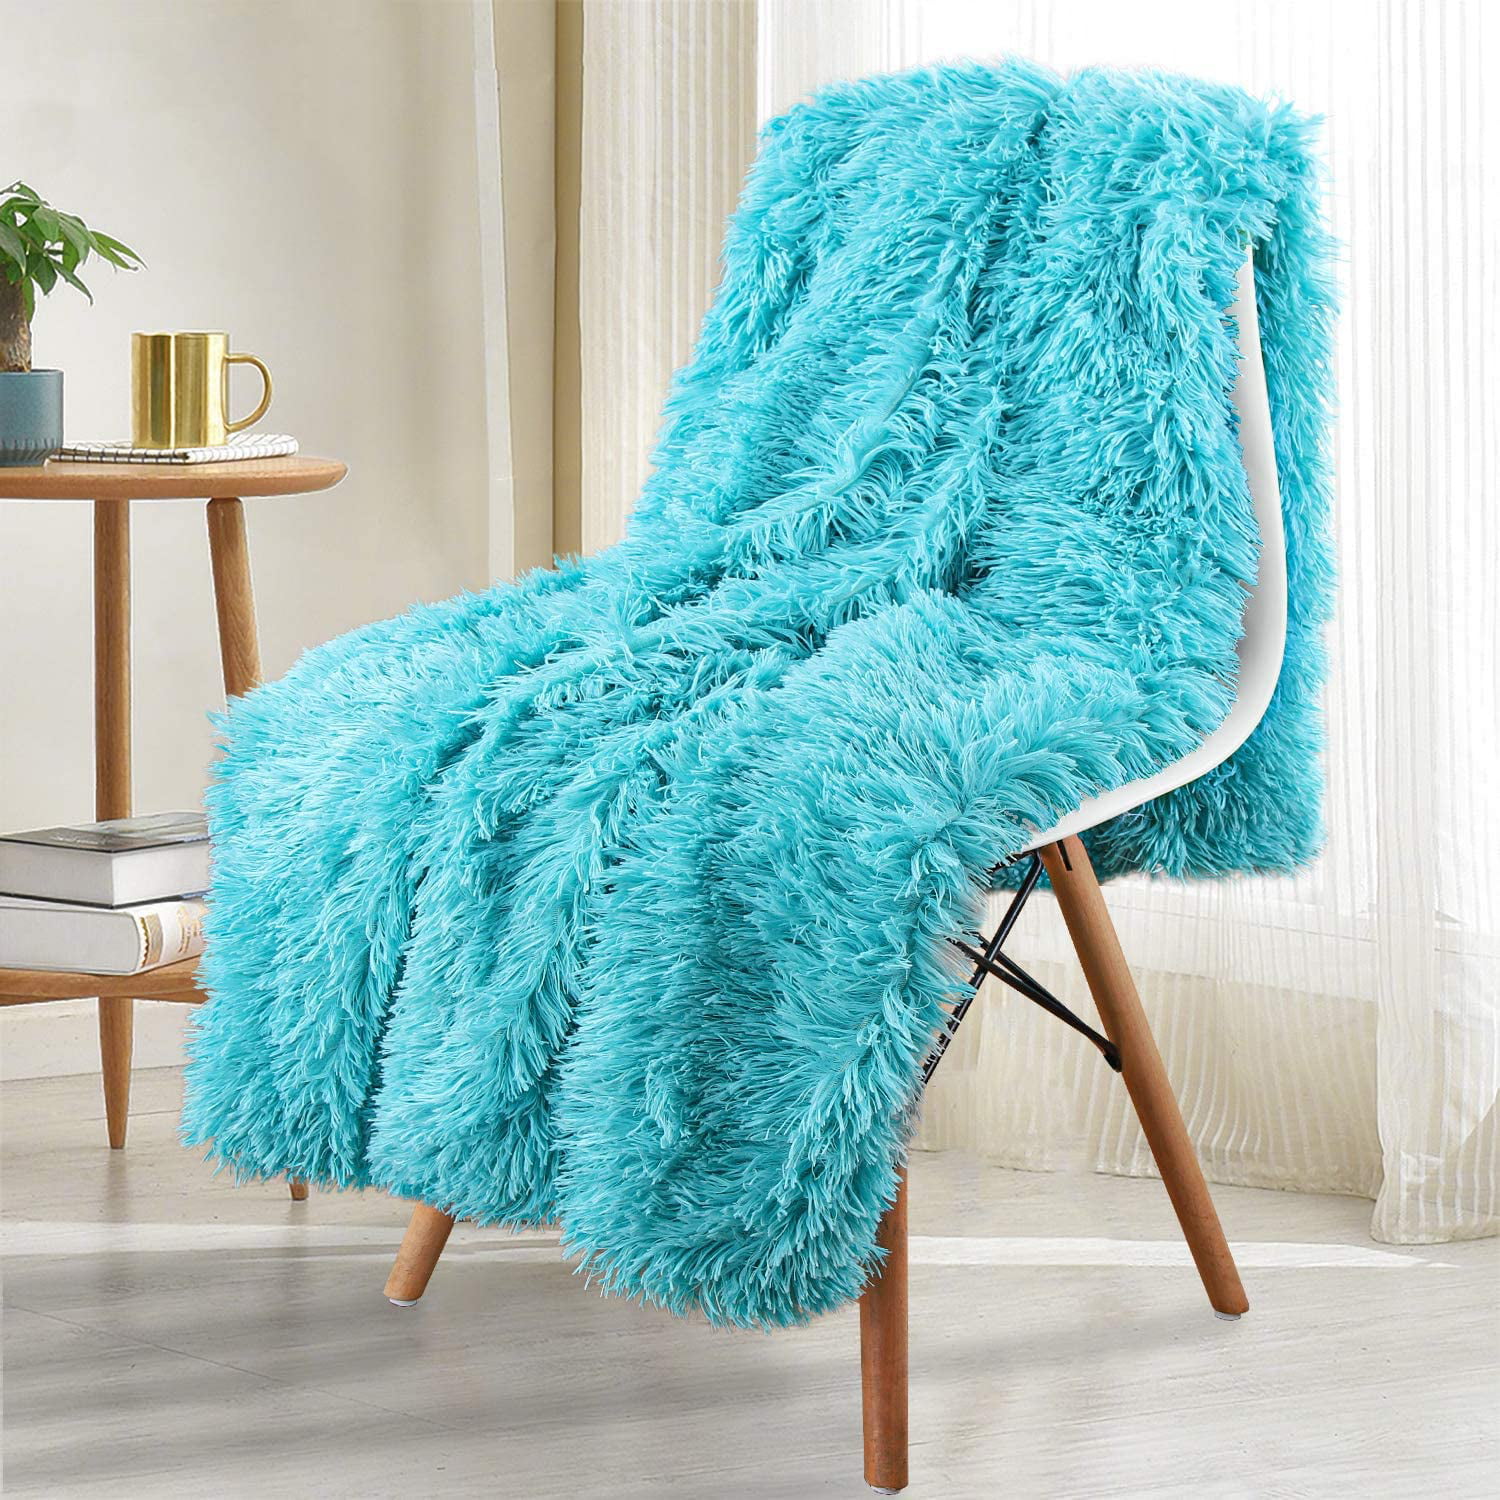 50x60 Teal Blue LOCHAS Super Soft Shaggy Faux Fur Blanket Plush Fuzzy Bed Throw Decorative Washable Cozy Sherpa Fluffy Blankets for Couch Chair Sofa